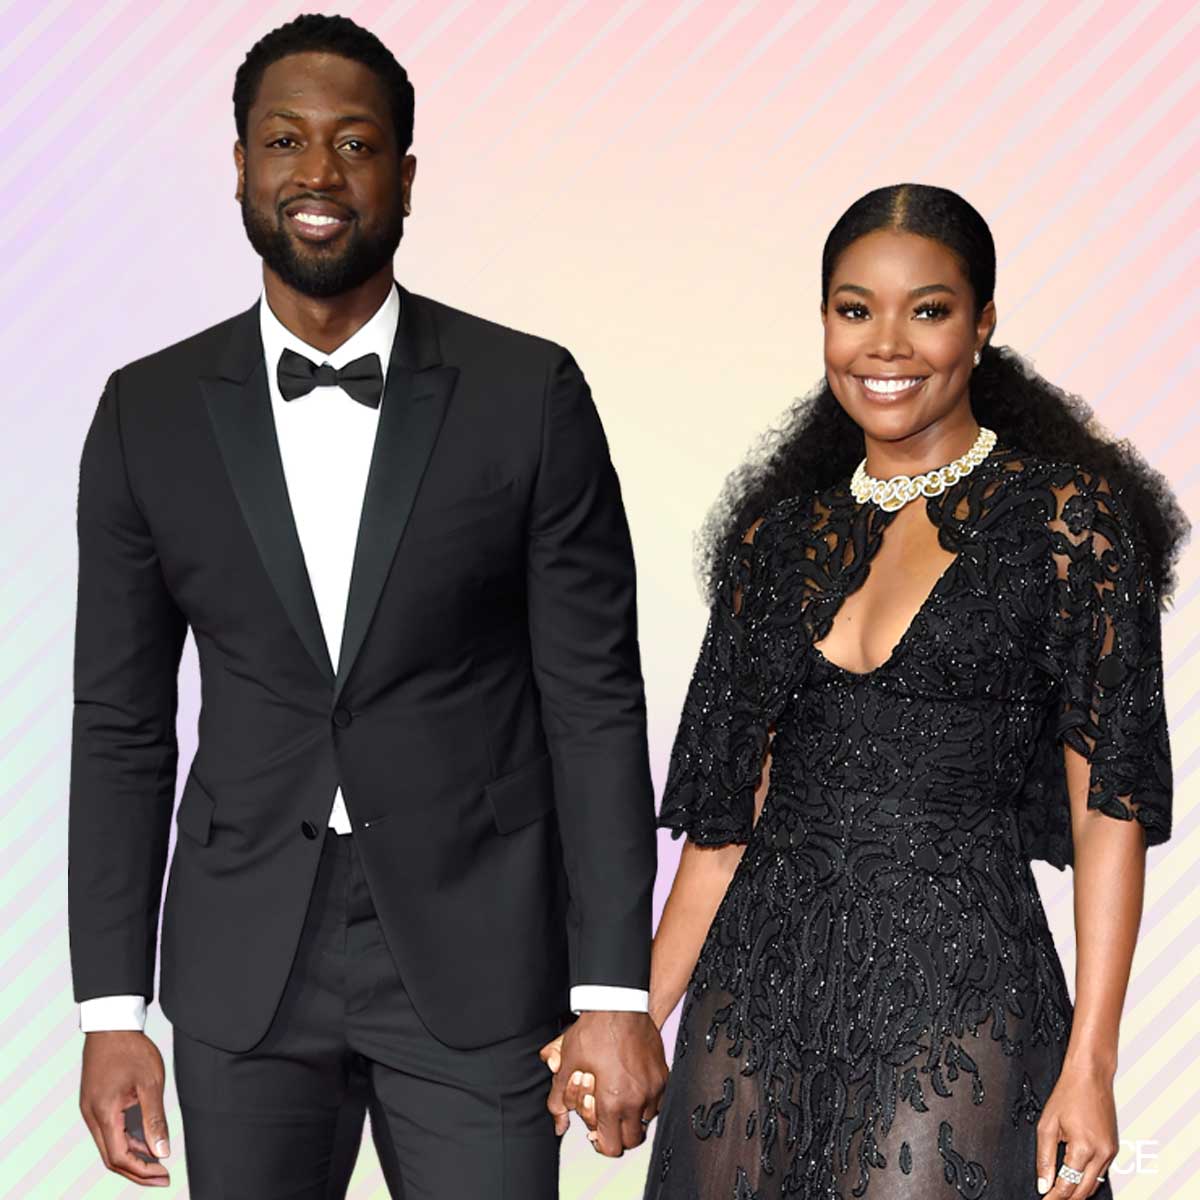 Union to gabrielle is married Dwyane Wade's